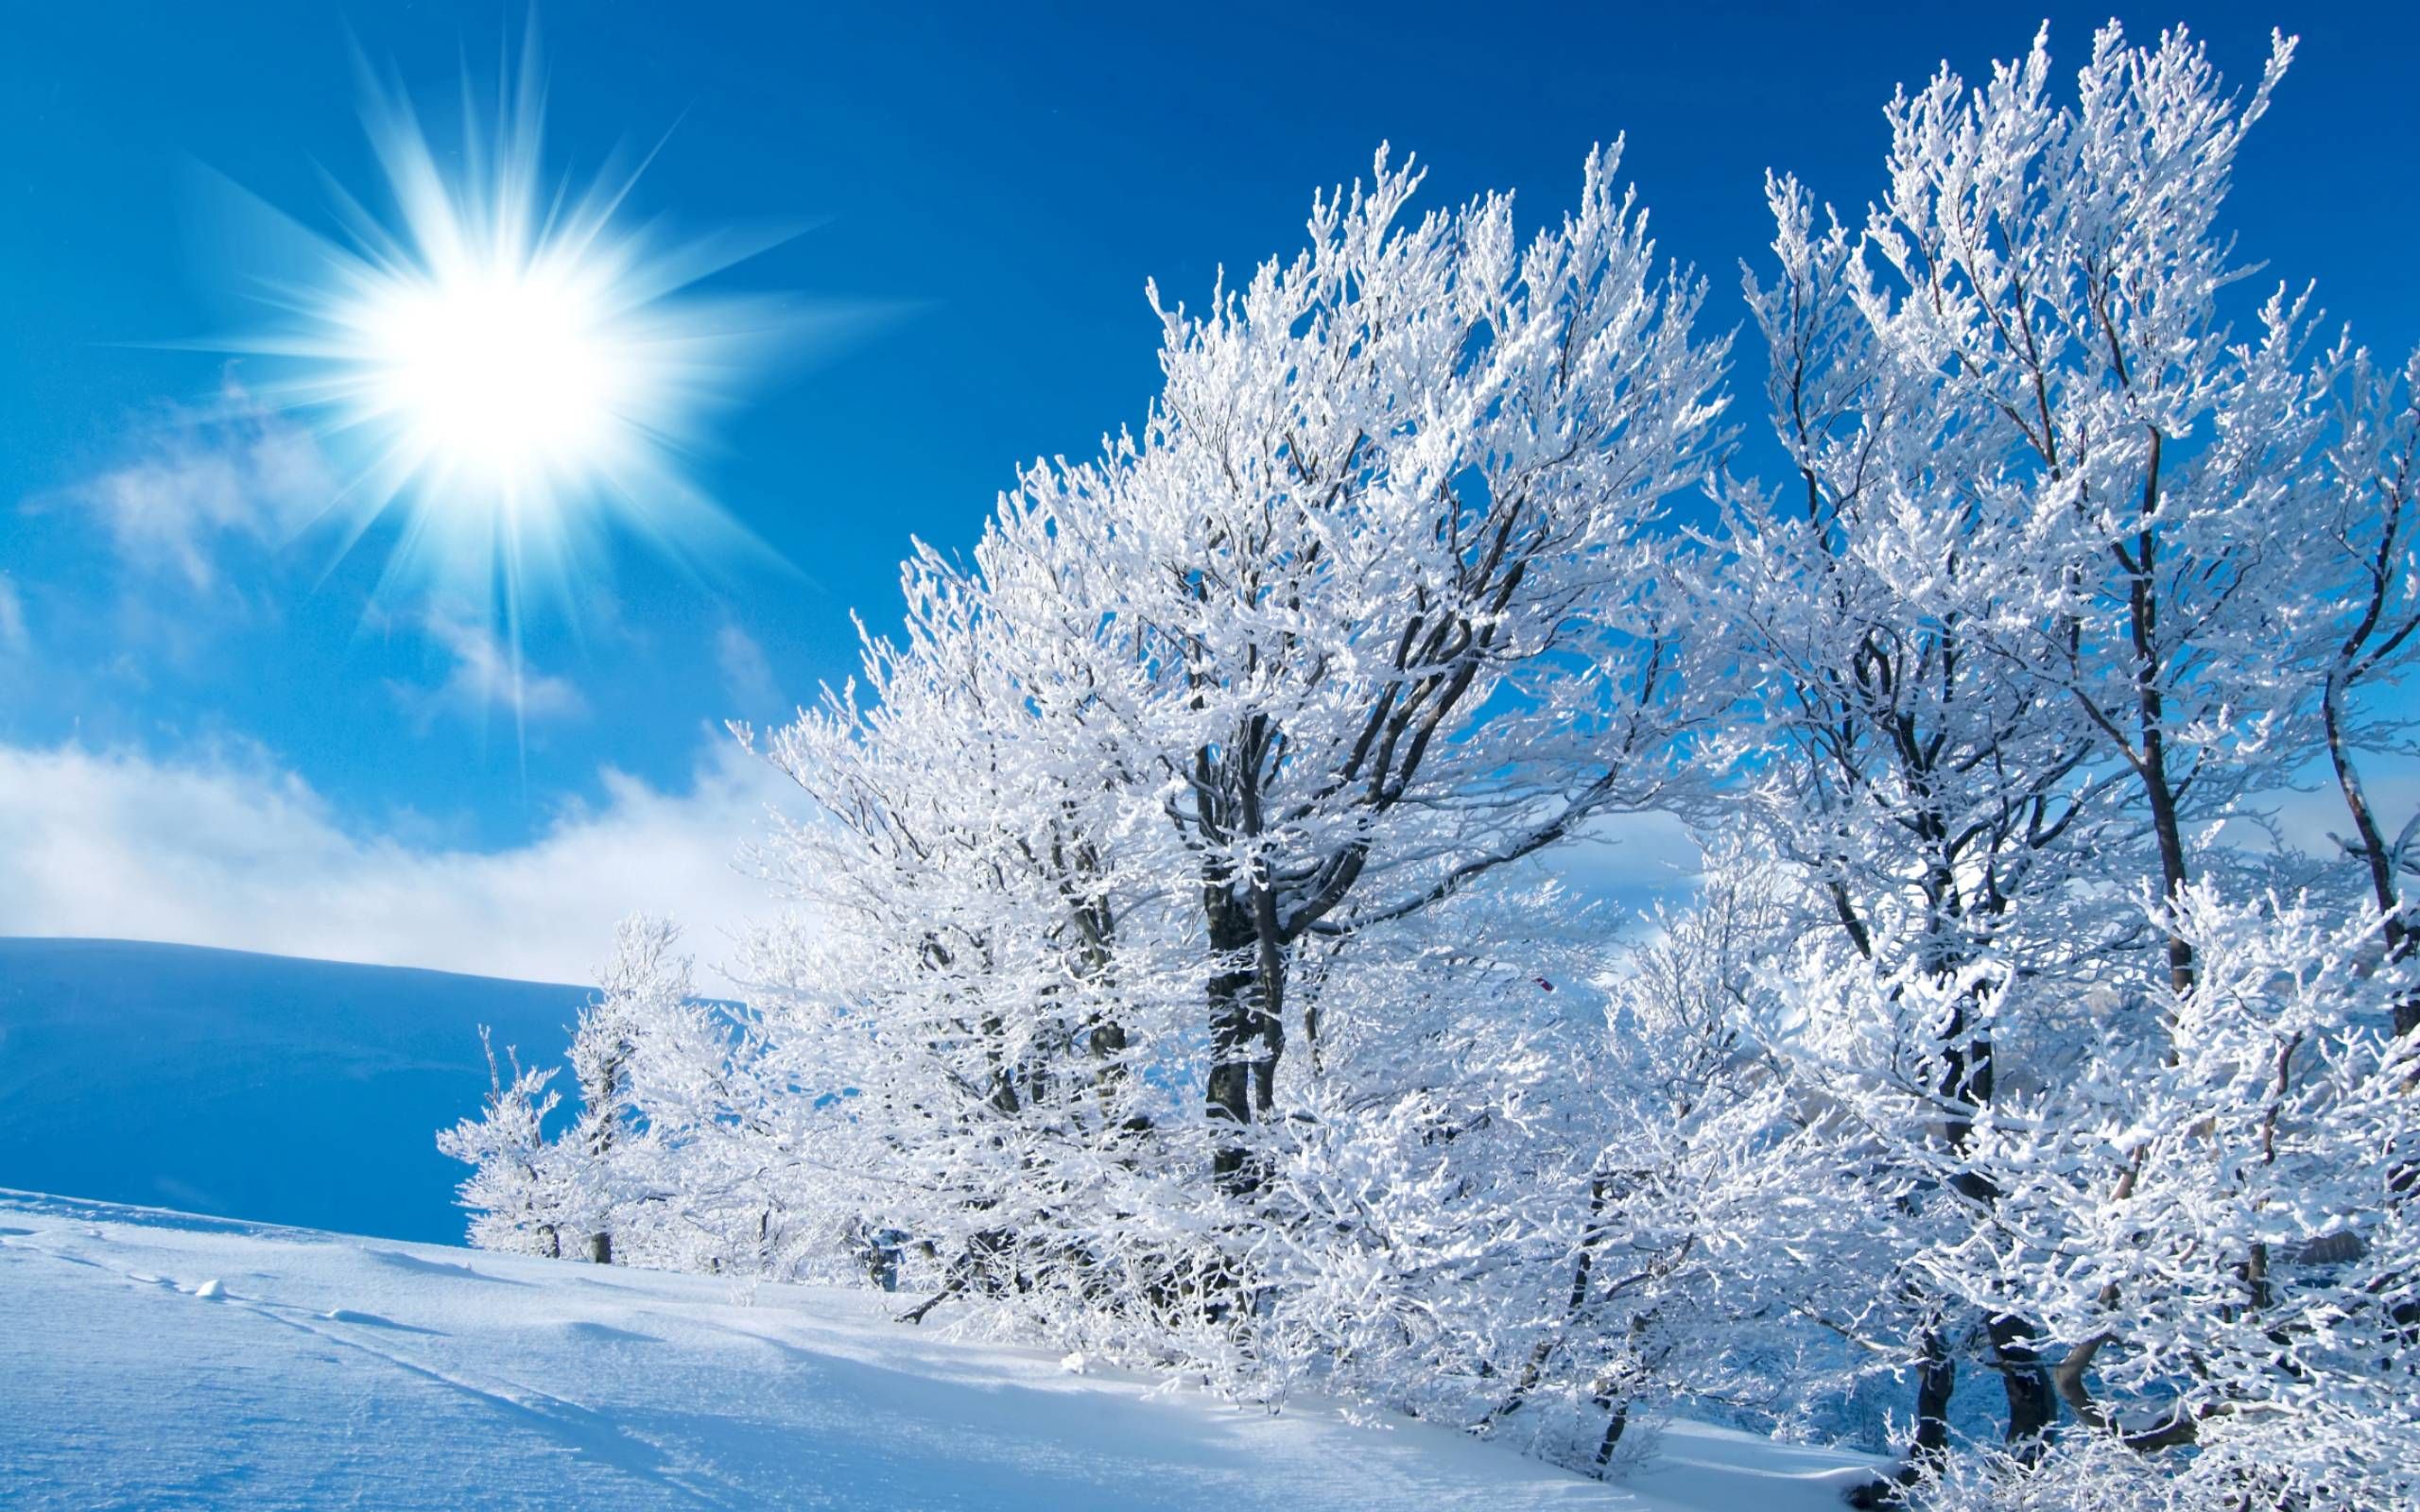 Winter Nature Wallpapers Hd Resolution Iarna in Winter